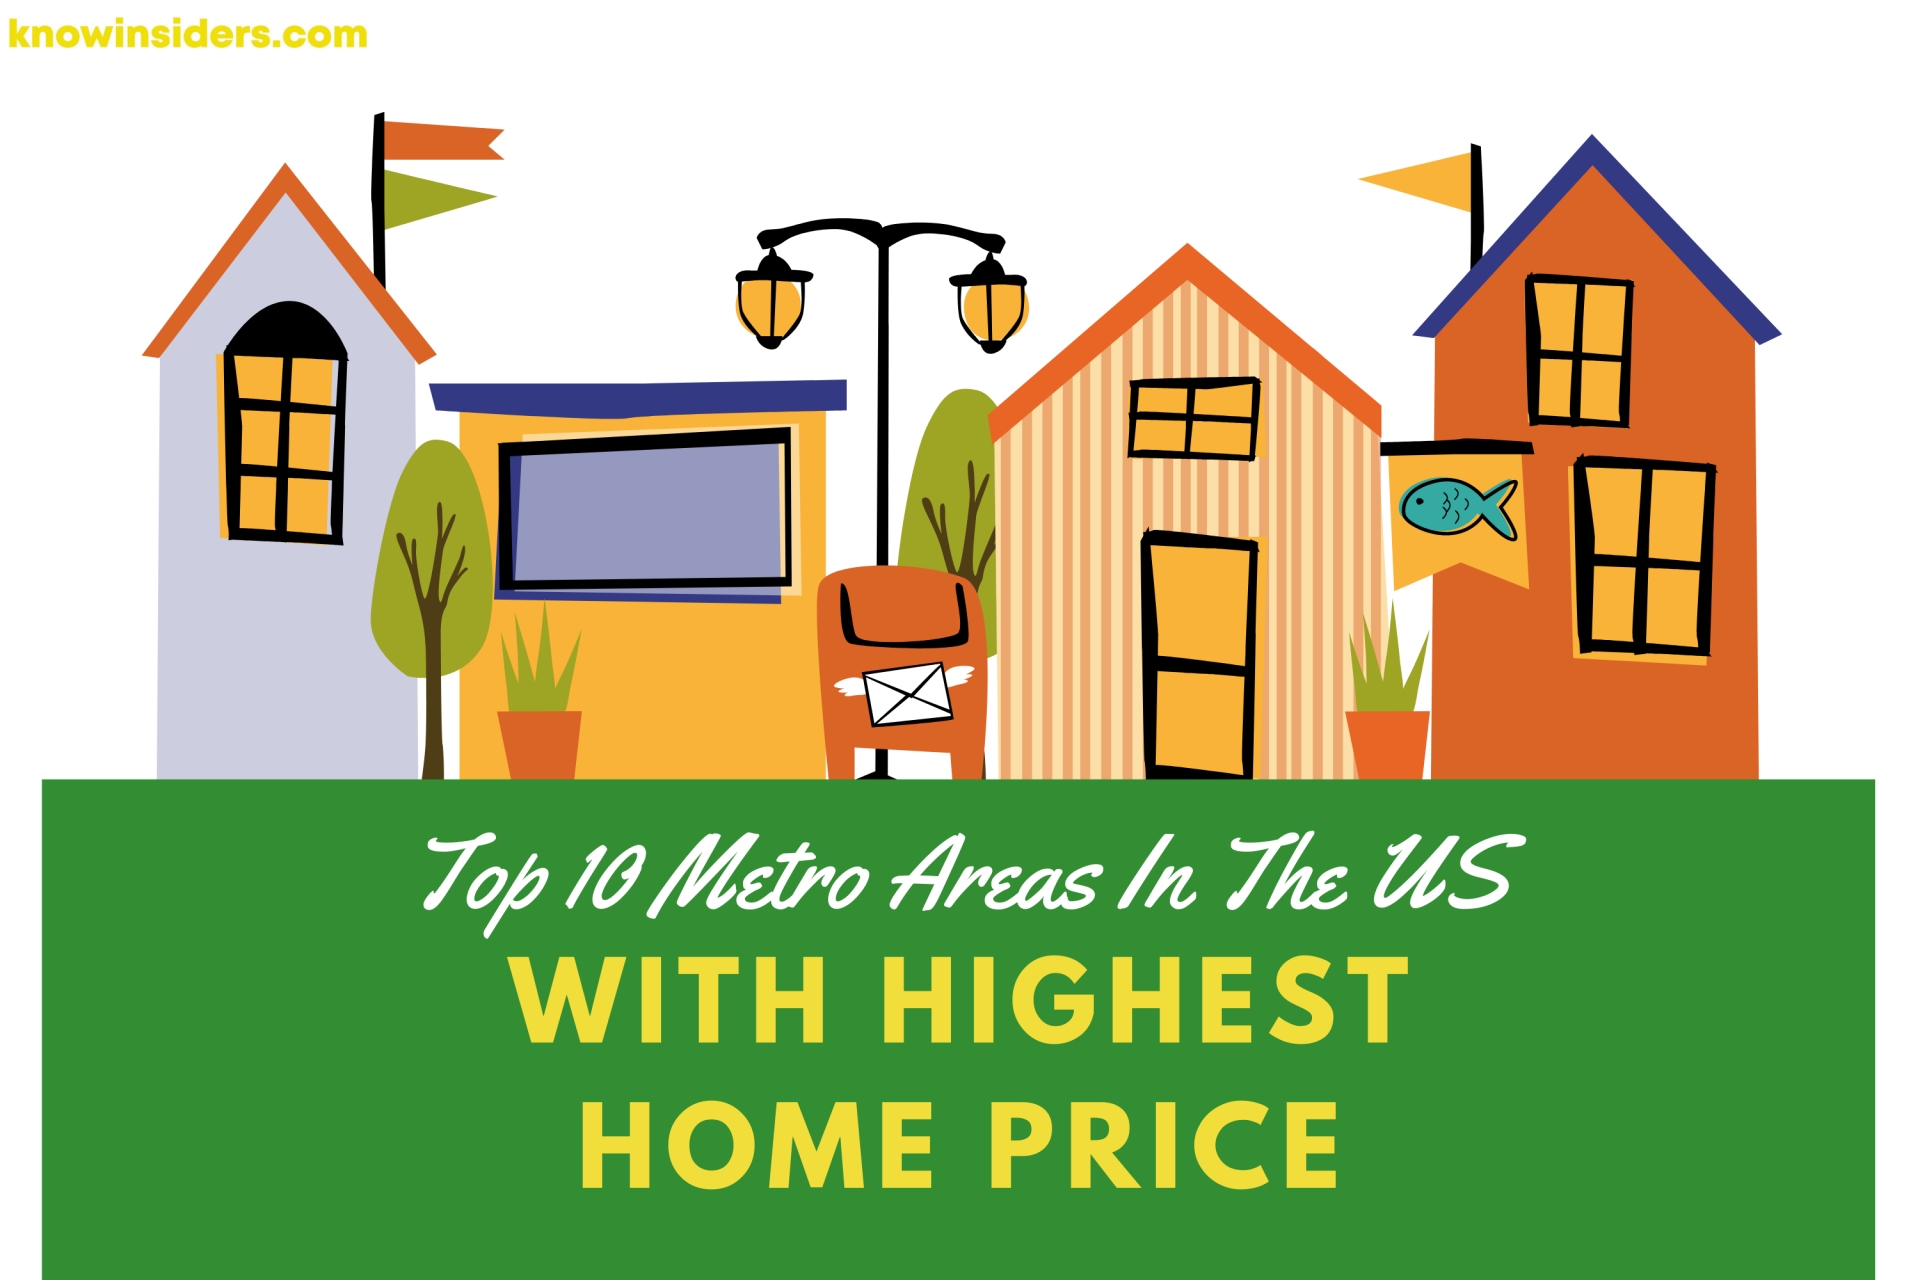 Top 10 Metro Areas In The US With The Highest Home Price